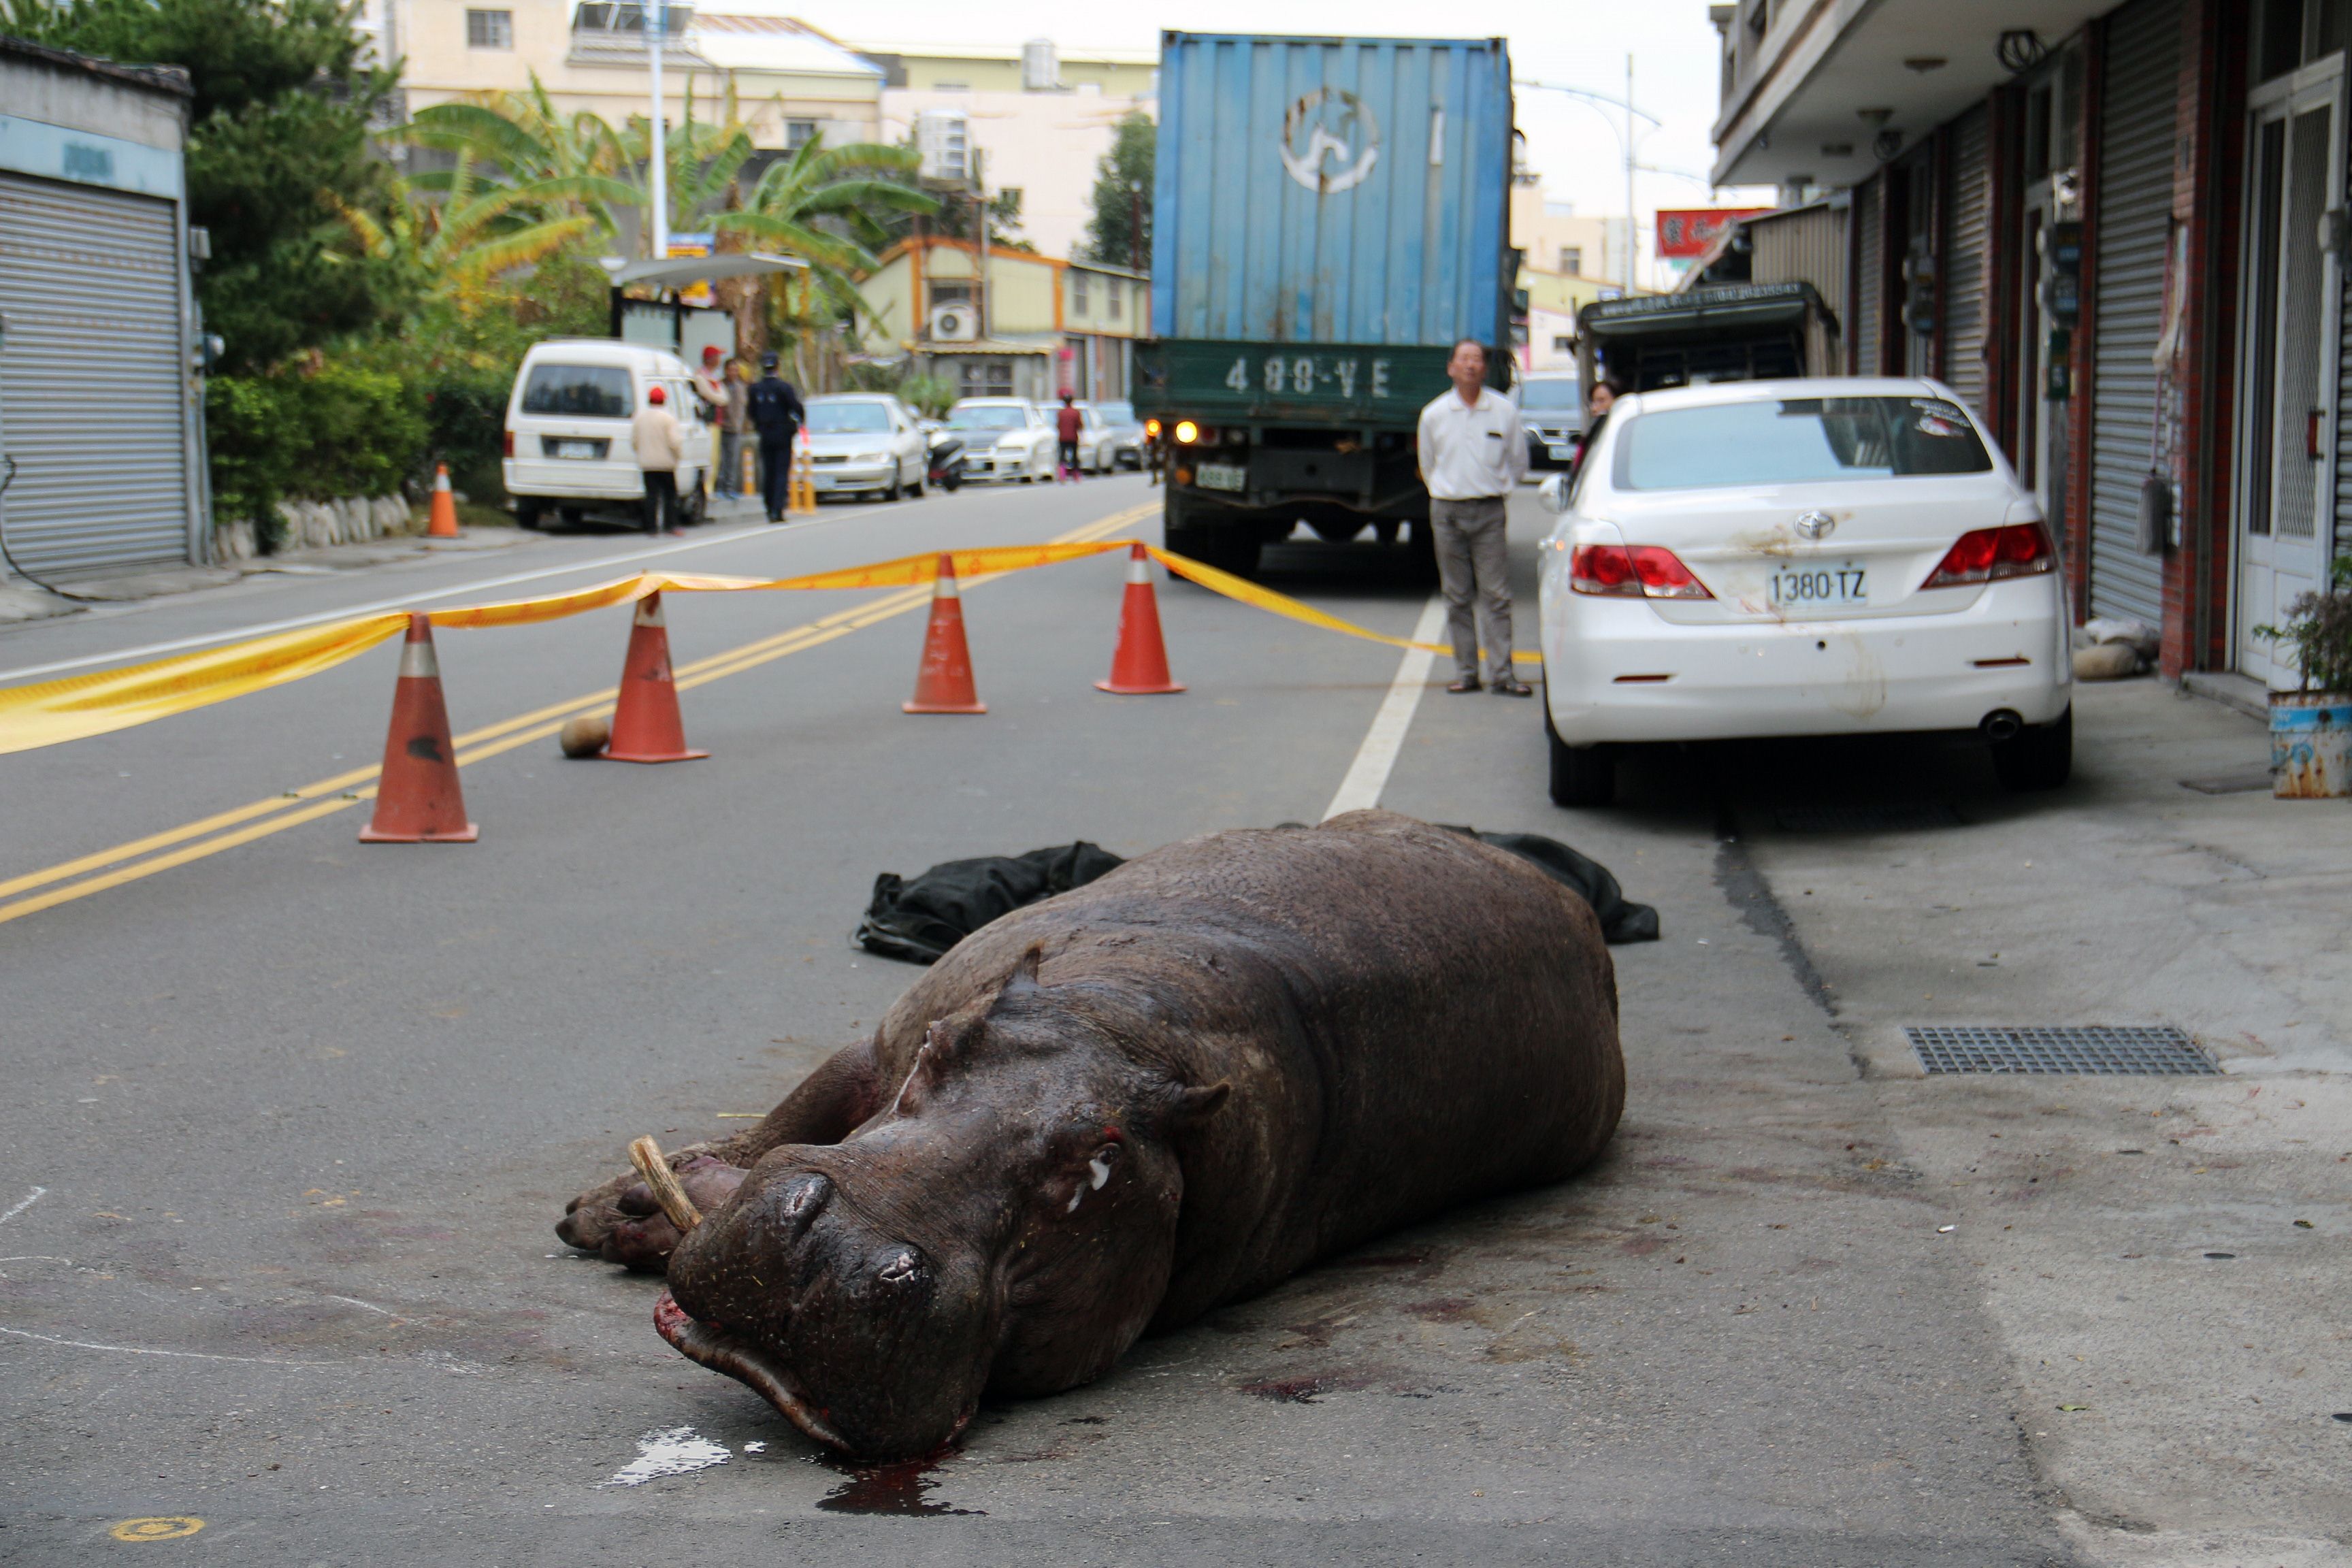 The injured hippo lies on the ground after it jumped from a truck in Miaoli county, Taiwan on Friday. Photo: AFP